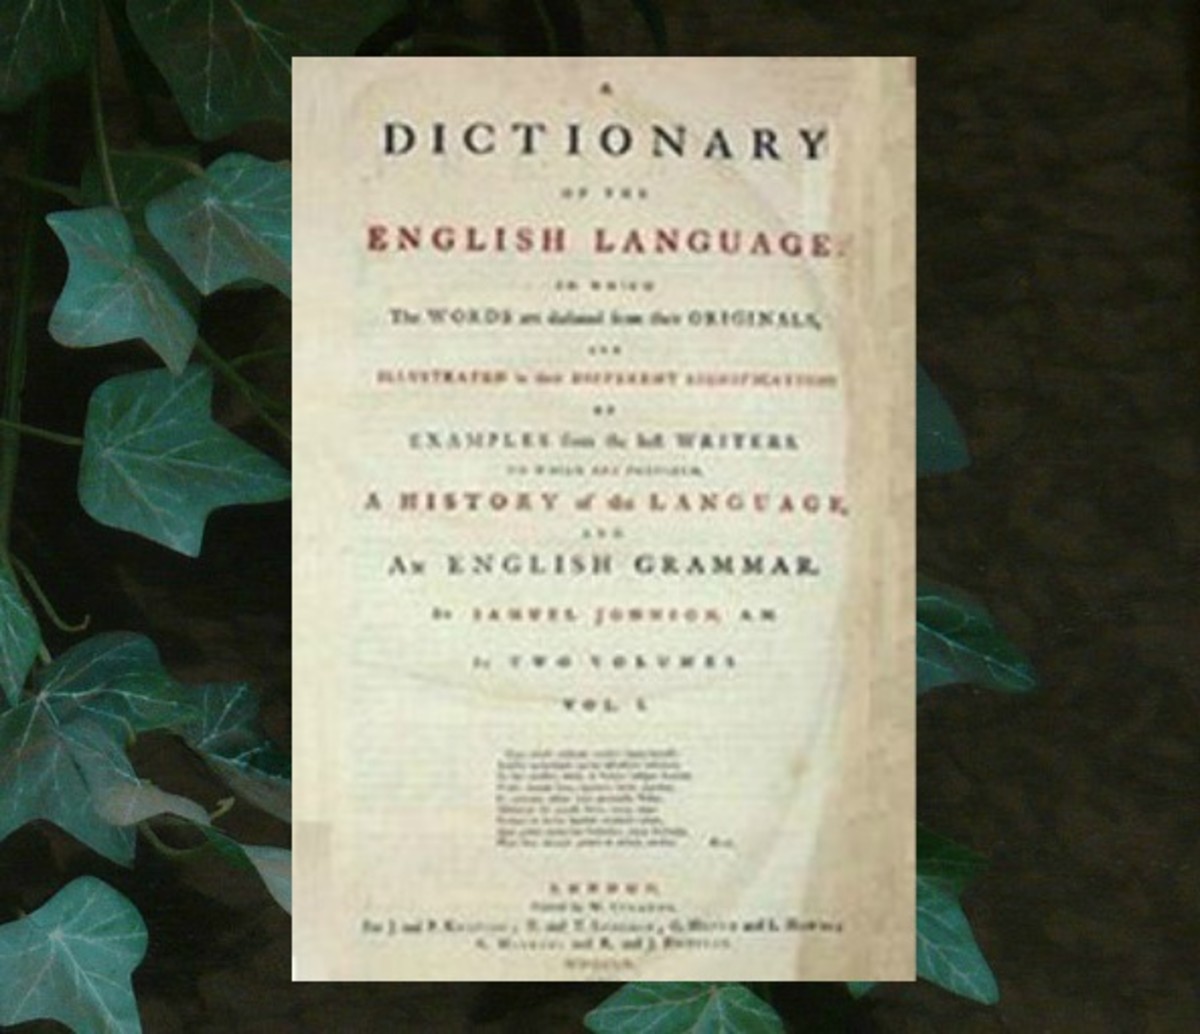 Dr. Samuel Johnson compiled the first English dictionary in 1755.